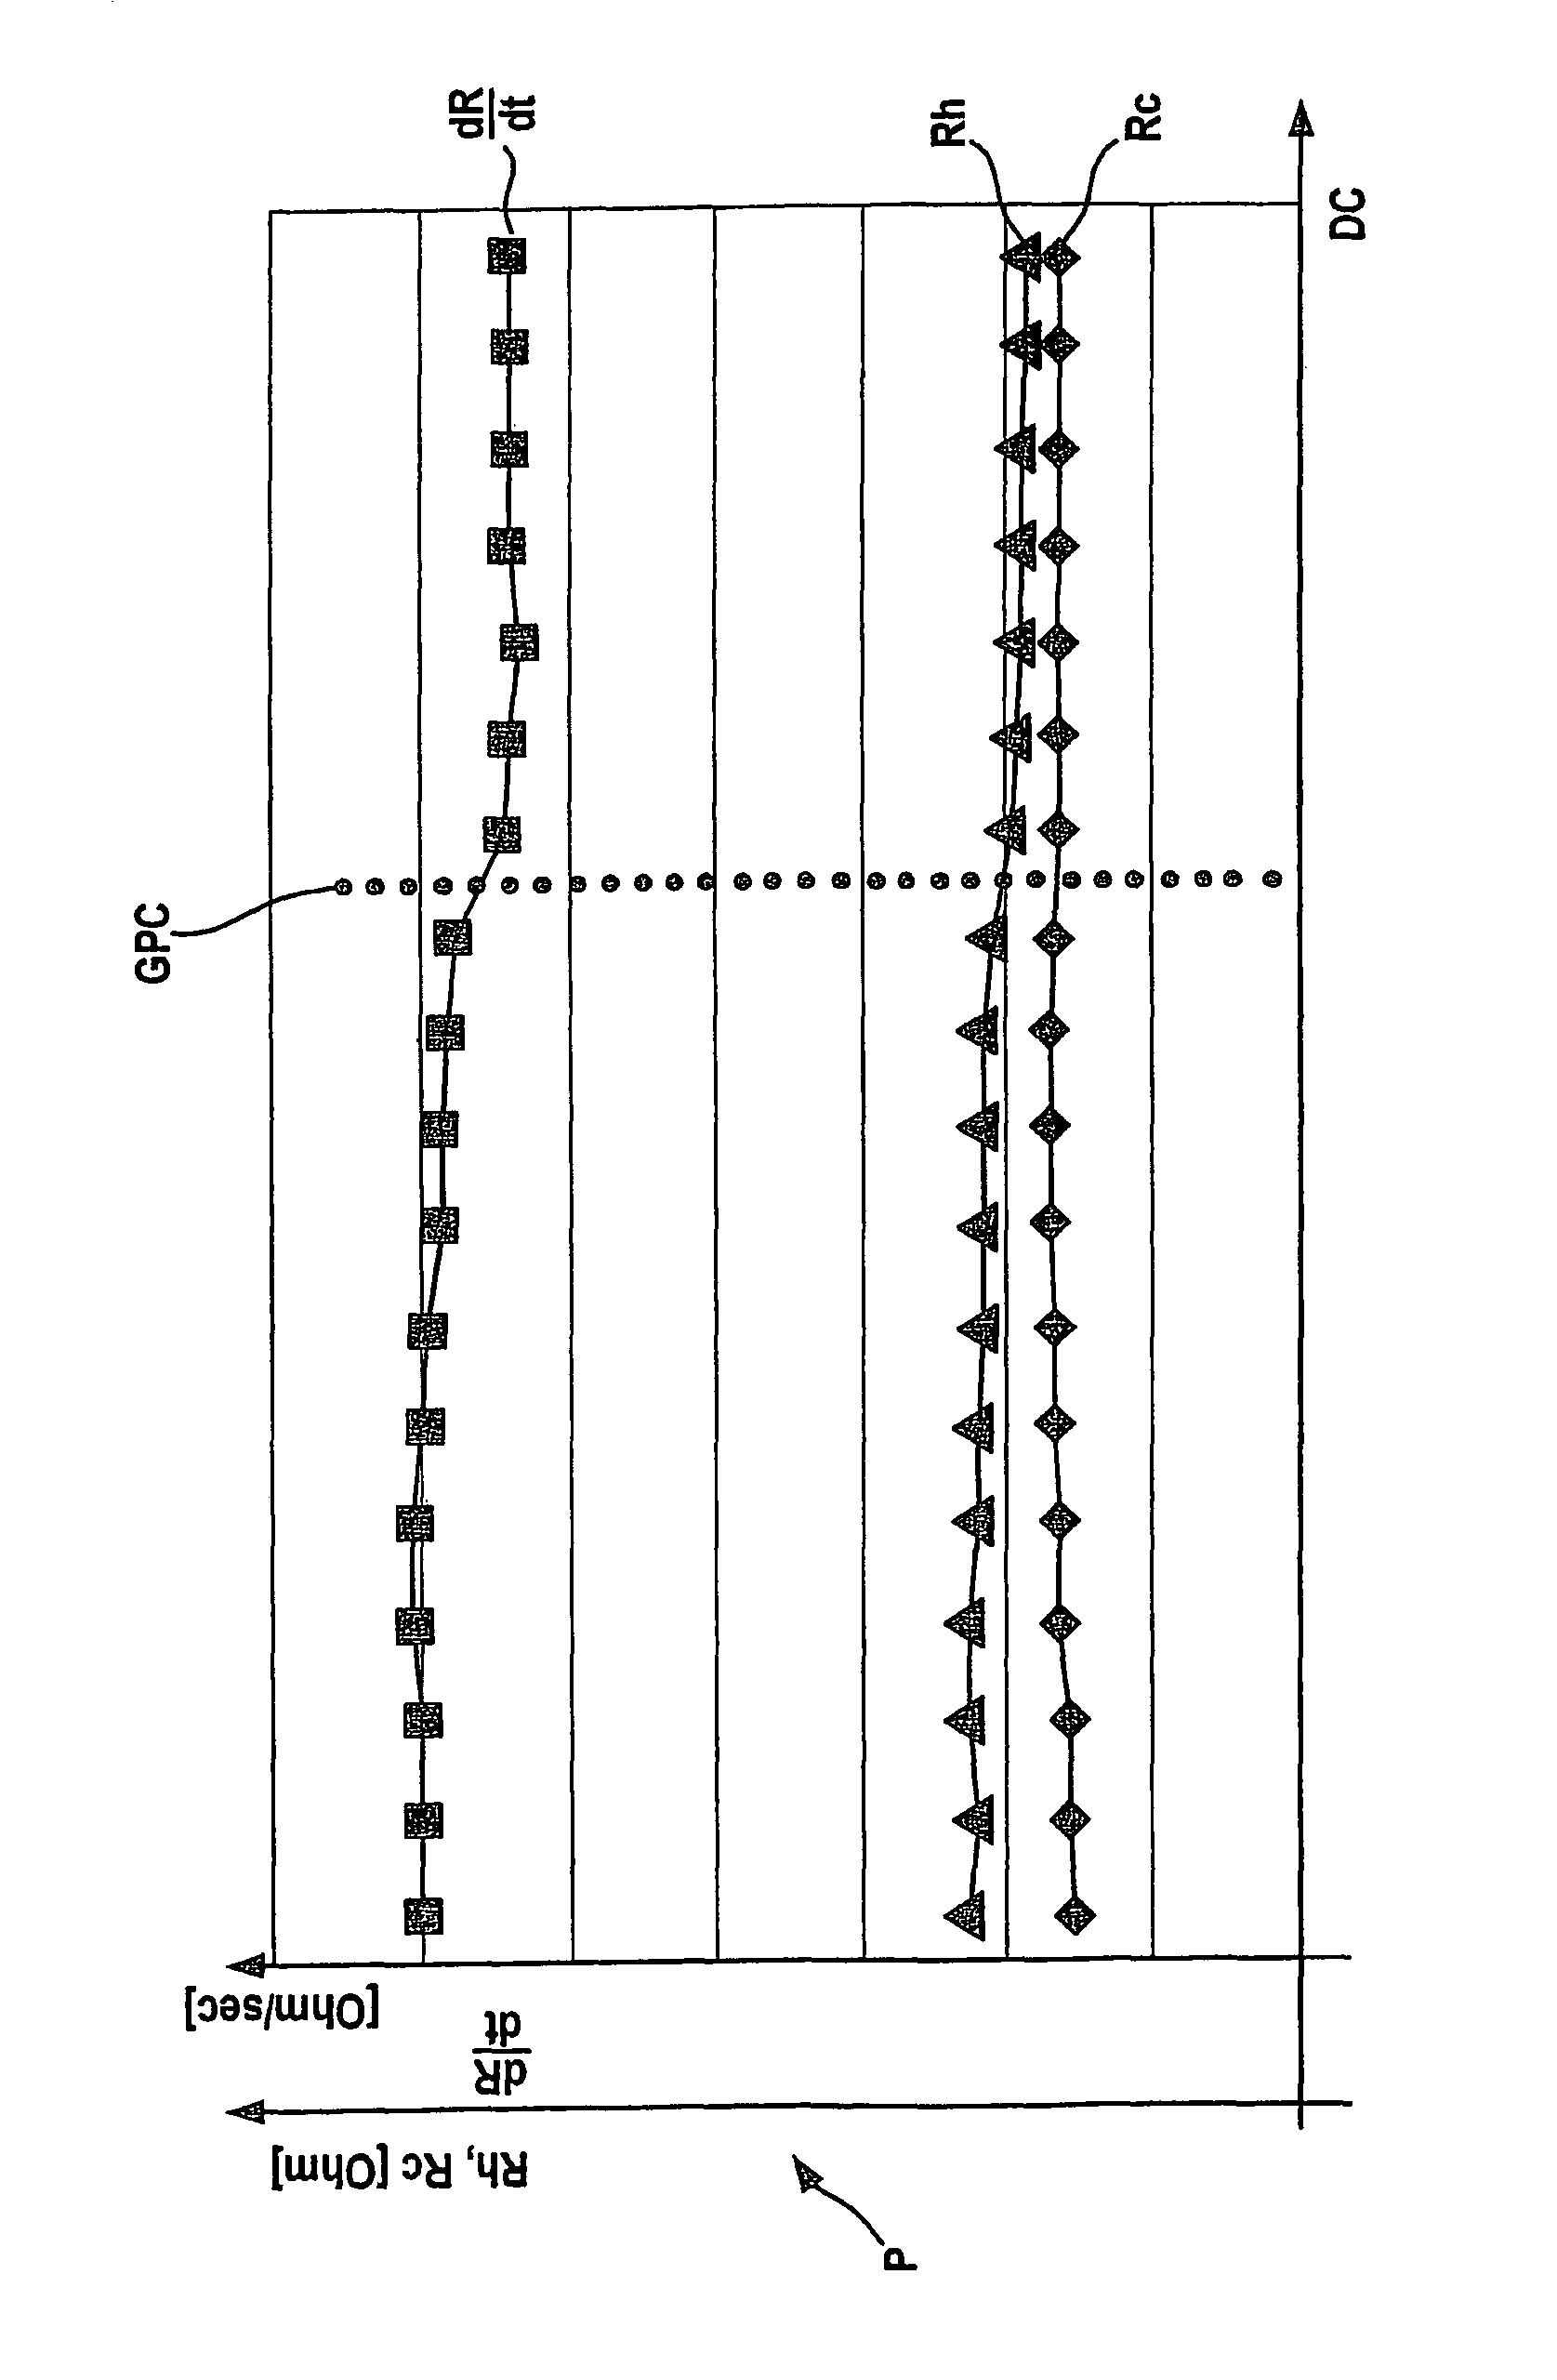 Method and device for detecting the exchange of sheathed-element glow plugs in a combustion engine